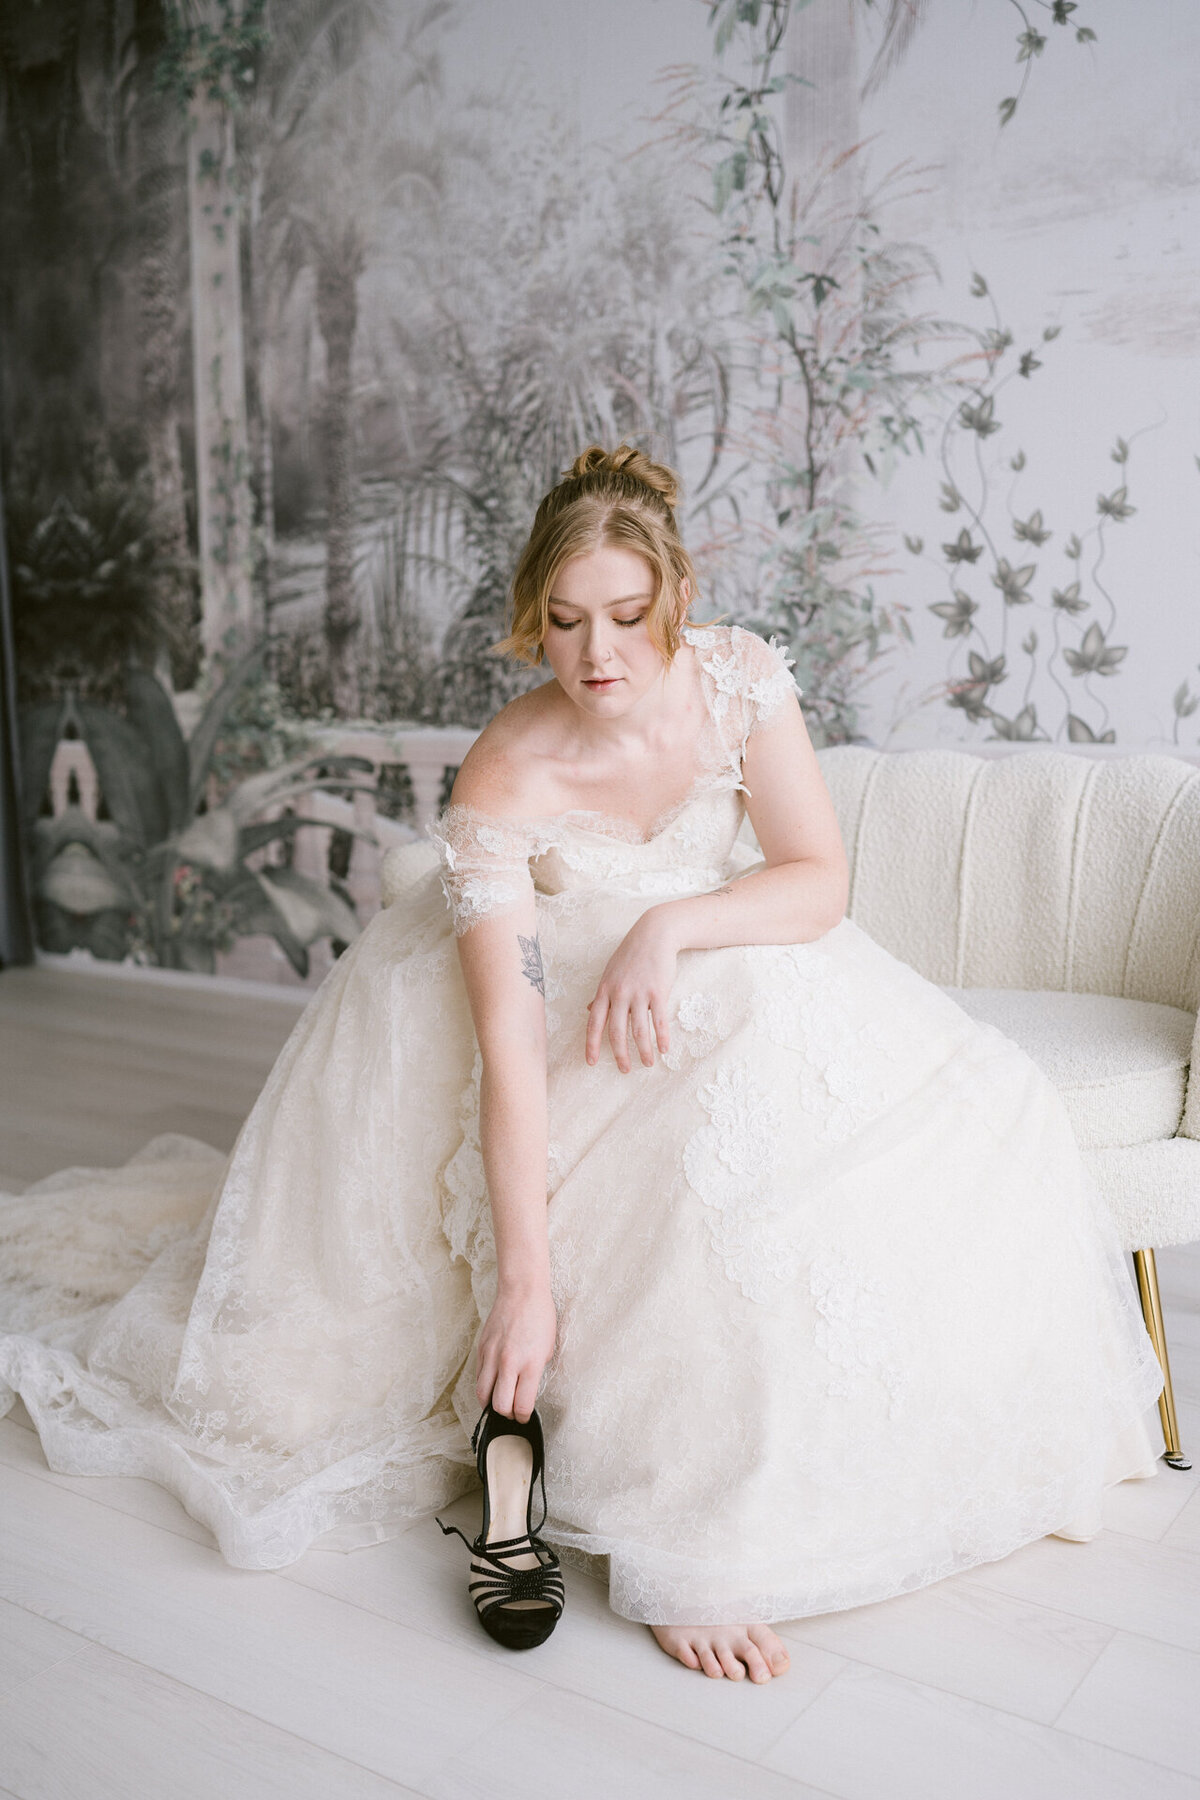 A bride fixing her high heels while getting ready at a studio